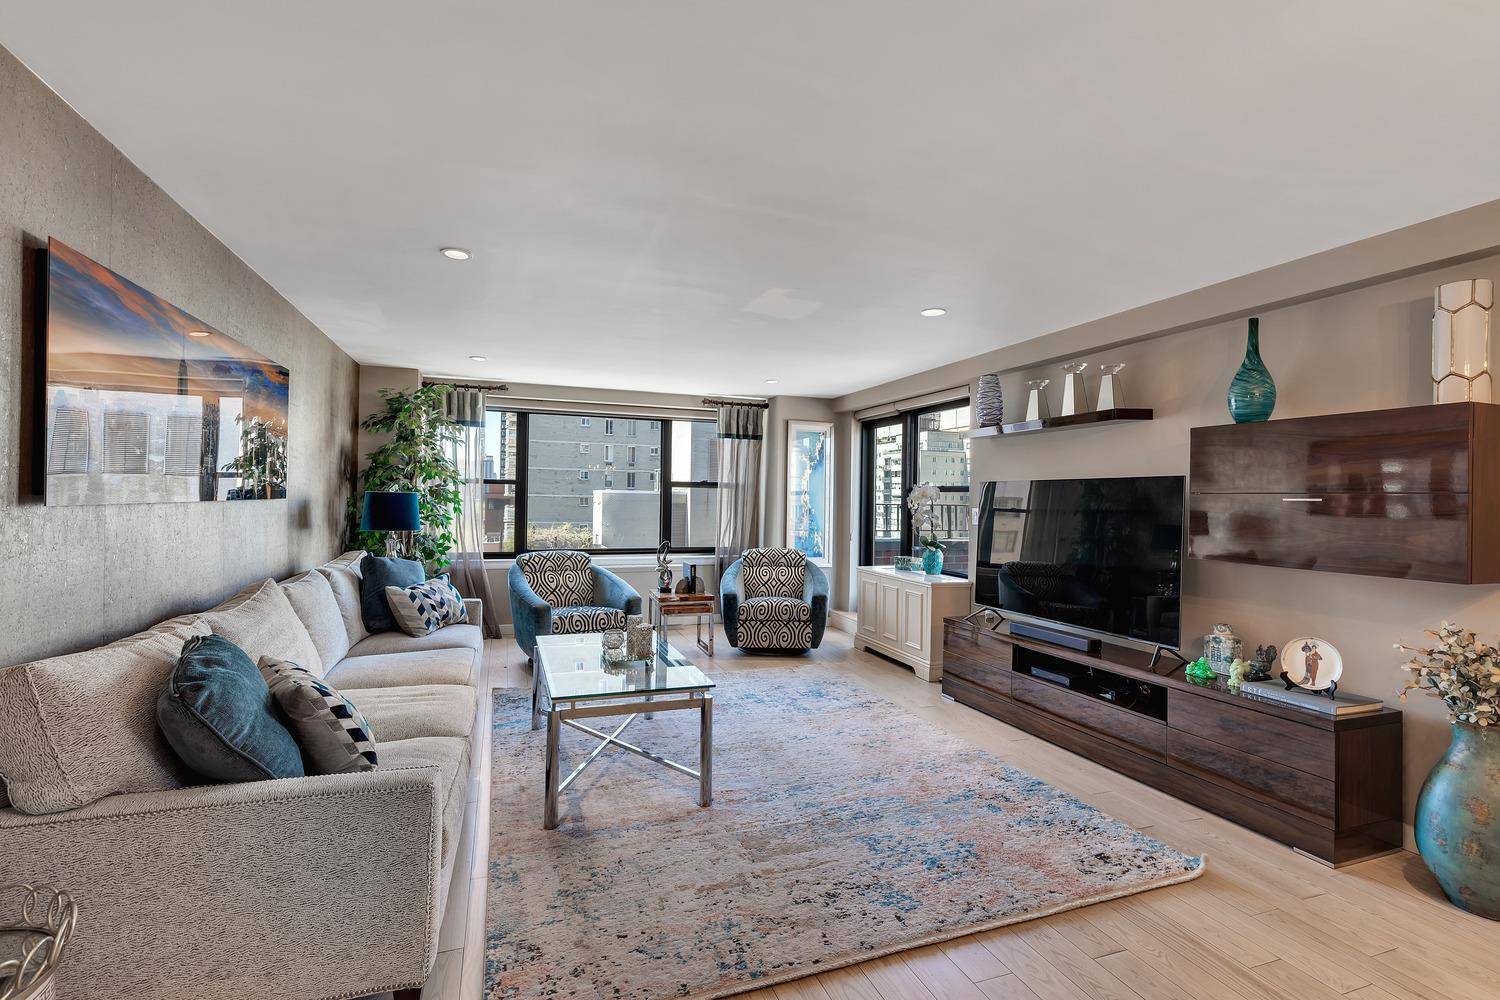 Luxurious 2 Bedroom, 2 Bathroom Penthouse with Expansive TerraceExperience the epitome of Upper East Side living in this stunning 2 bedroom, 2 bathroom penthouse offering a rare blend of sophisticated ...